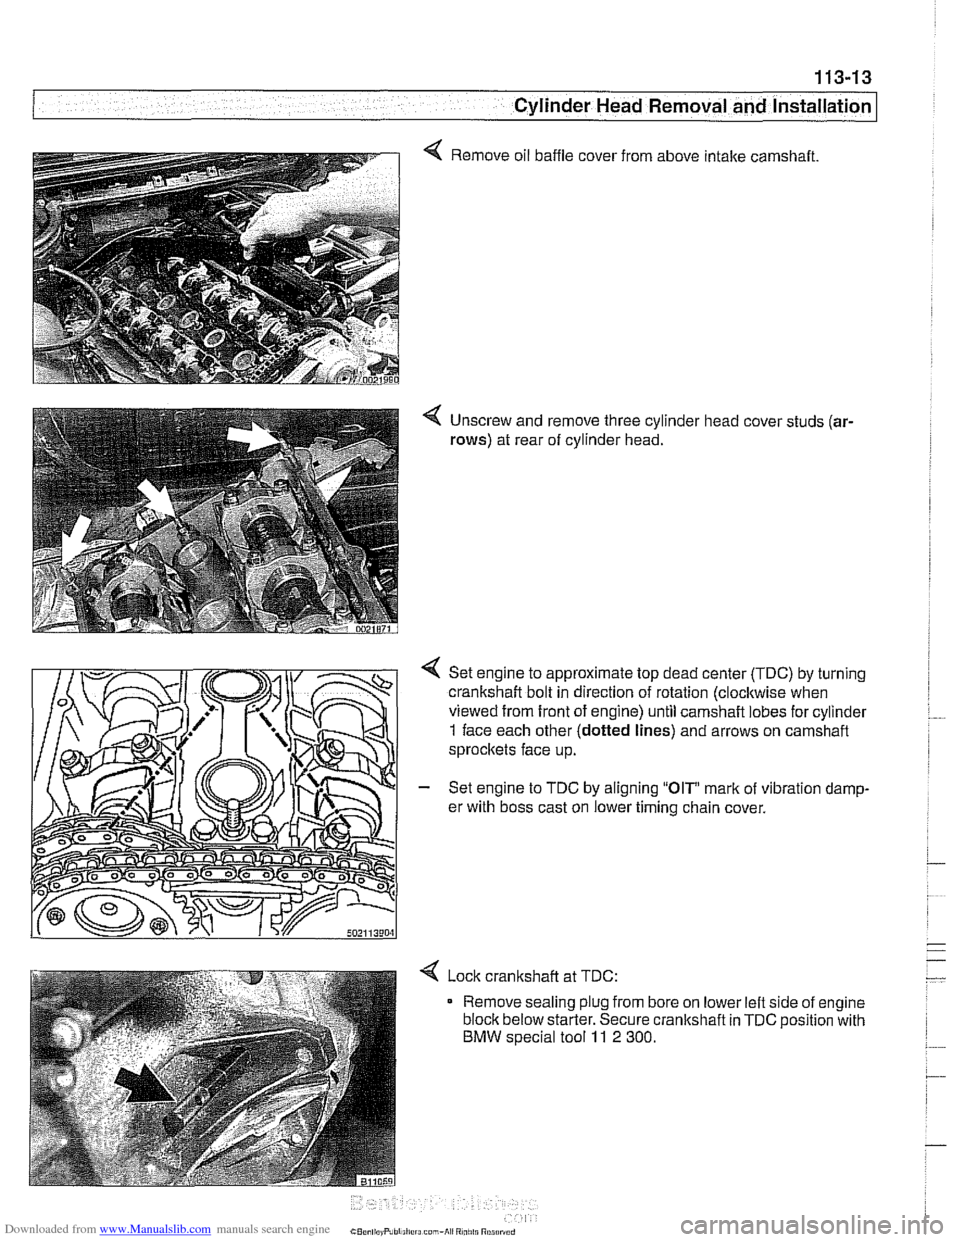 BMW 540i 1998 E39 Workshop Manual Downloaded from www.Manualslib.com manuals search engine 
- - , -. I Cylinder Head Removal and lnstallatio~ 
4 Remove oil baffle  cover from  above intake camshaft. 
4 Unscrew  and remove  three cylin